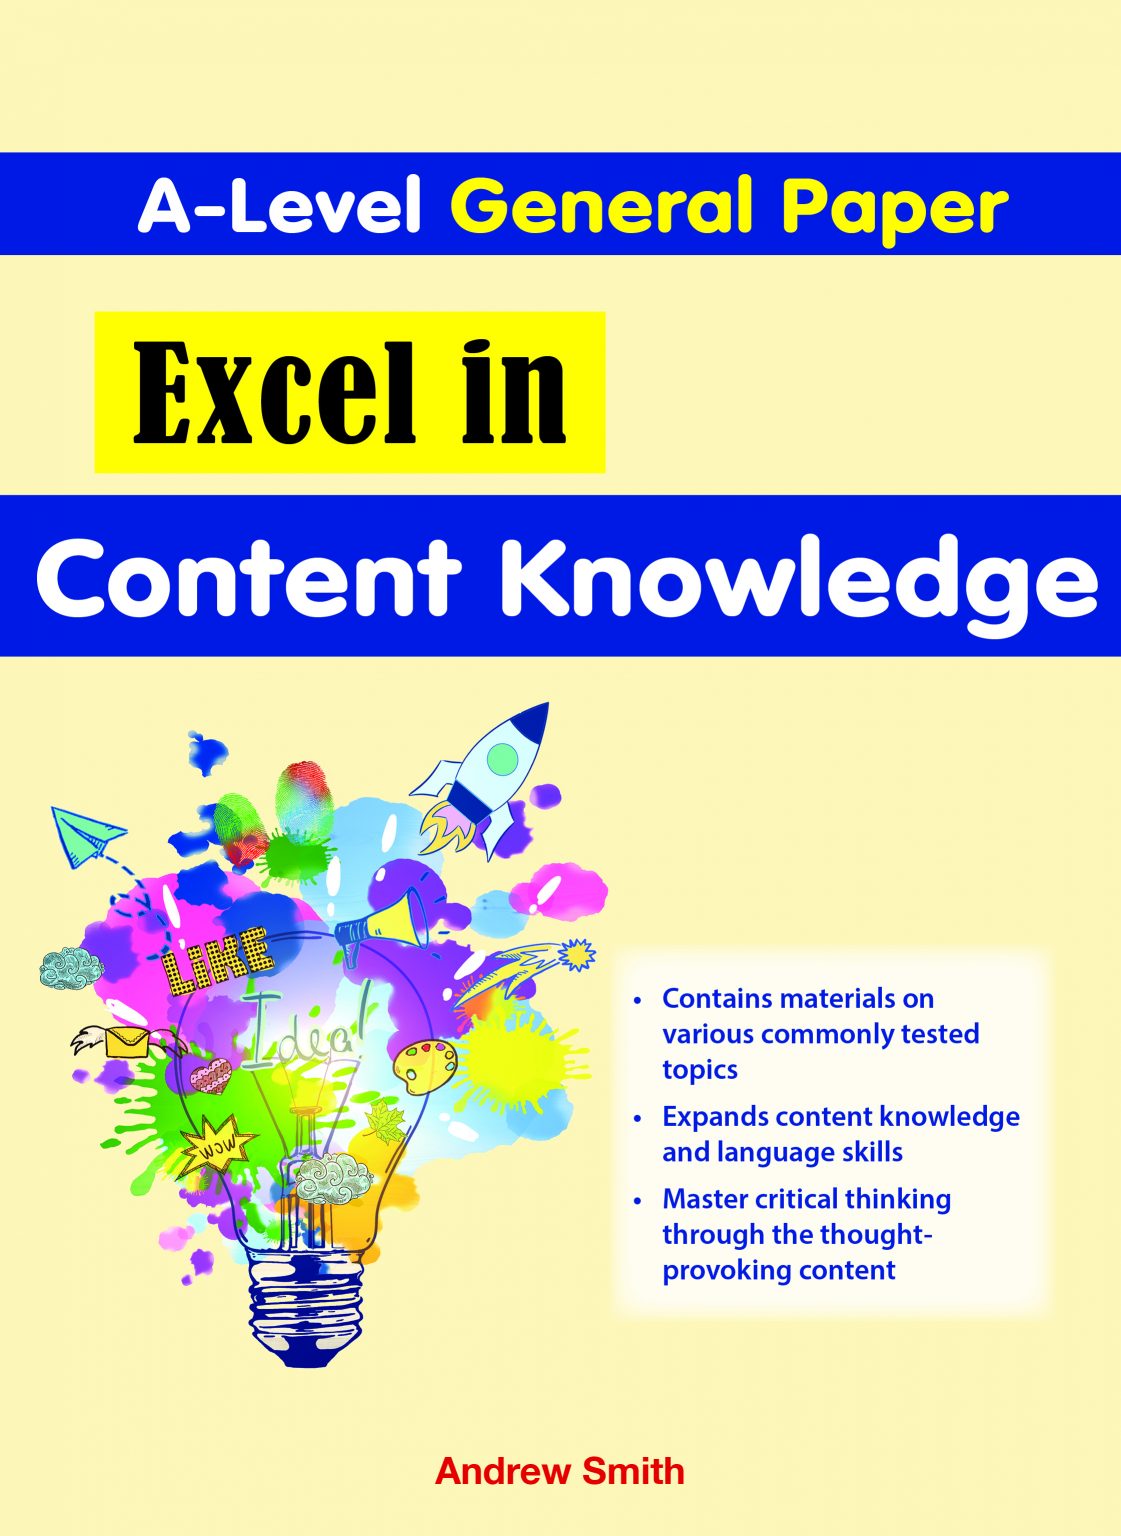 A-Level General Paper Excel in Content Knowledge